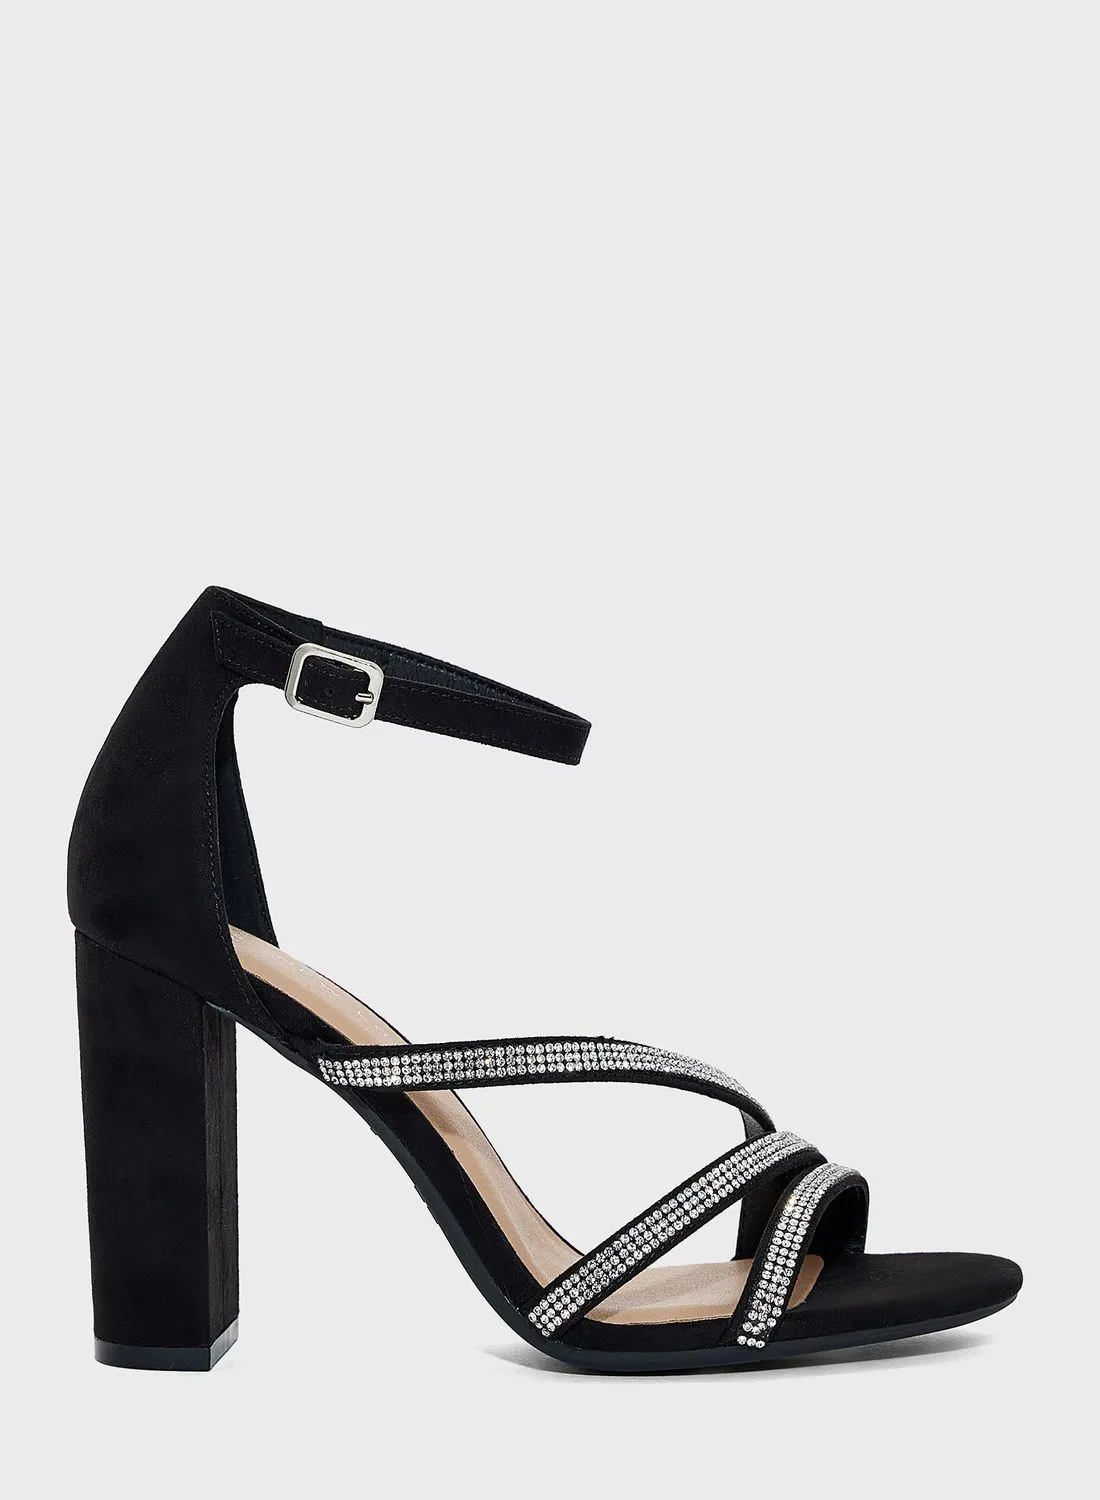 NEW LOOK Sparkle Ankle Strap Sandals